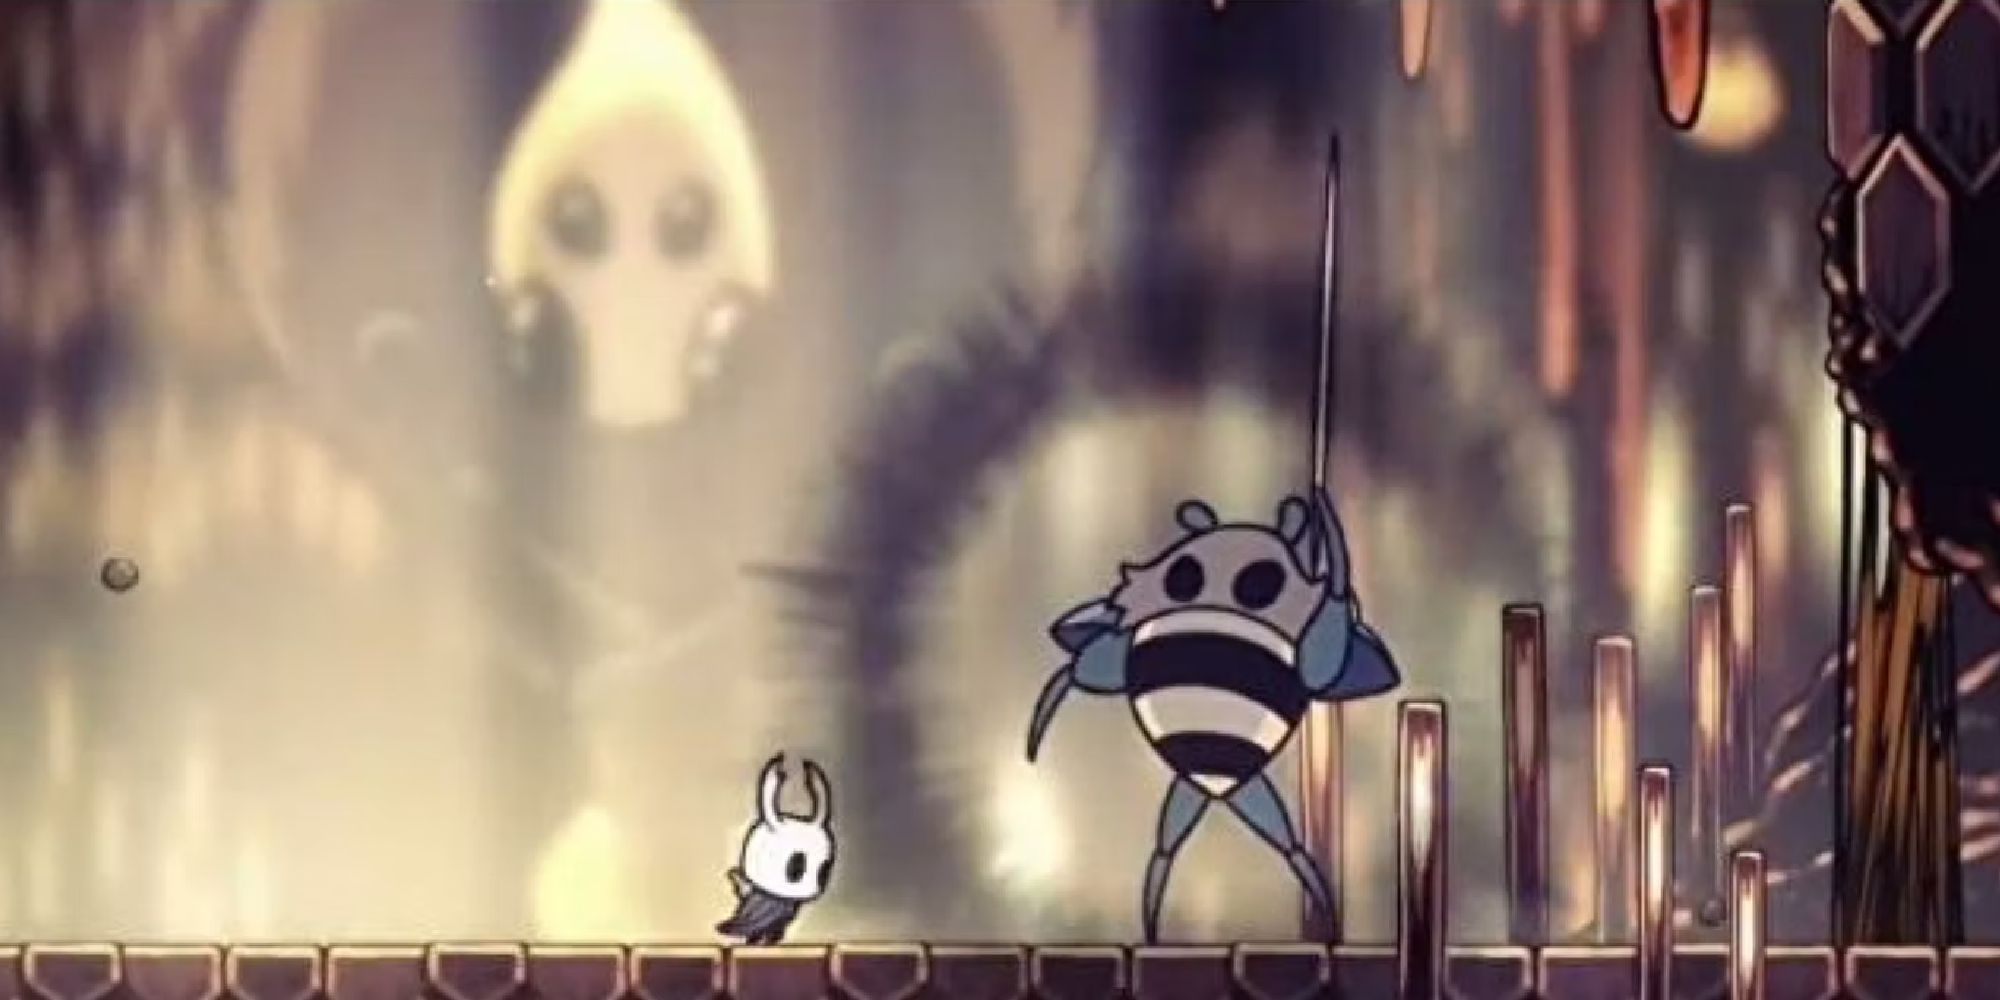 Encountering the Hive Knight in Hollow Knight